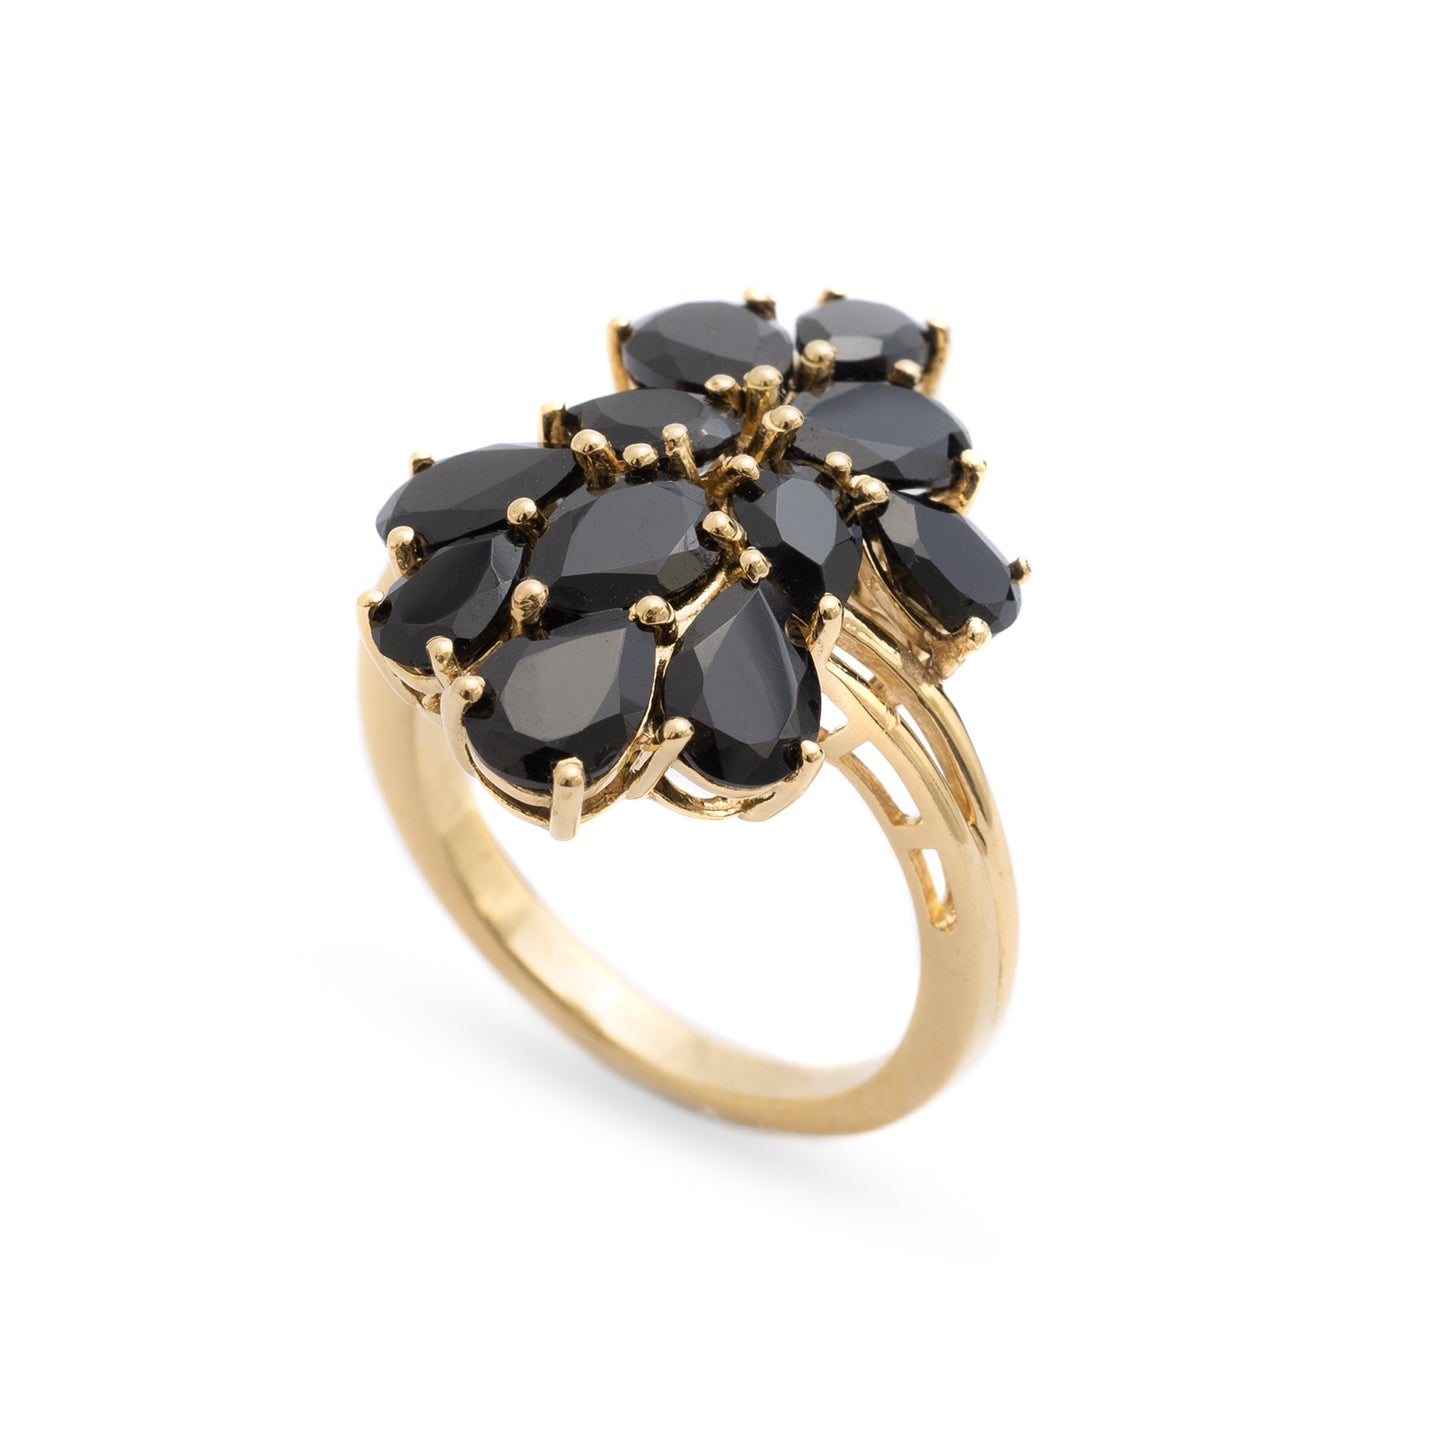 Vintage Large Gold Plated Silver Cocktail/Dress Ring With Black Garnet Cluster S (Code A295)